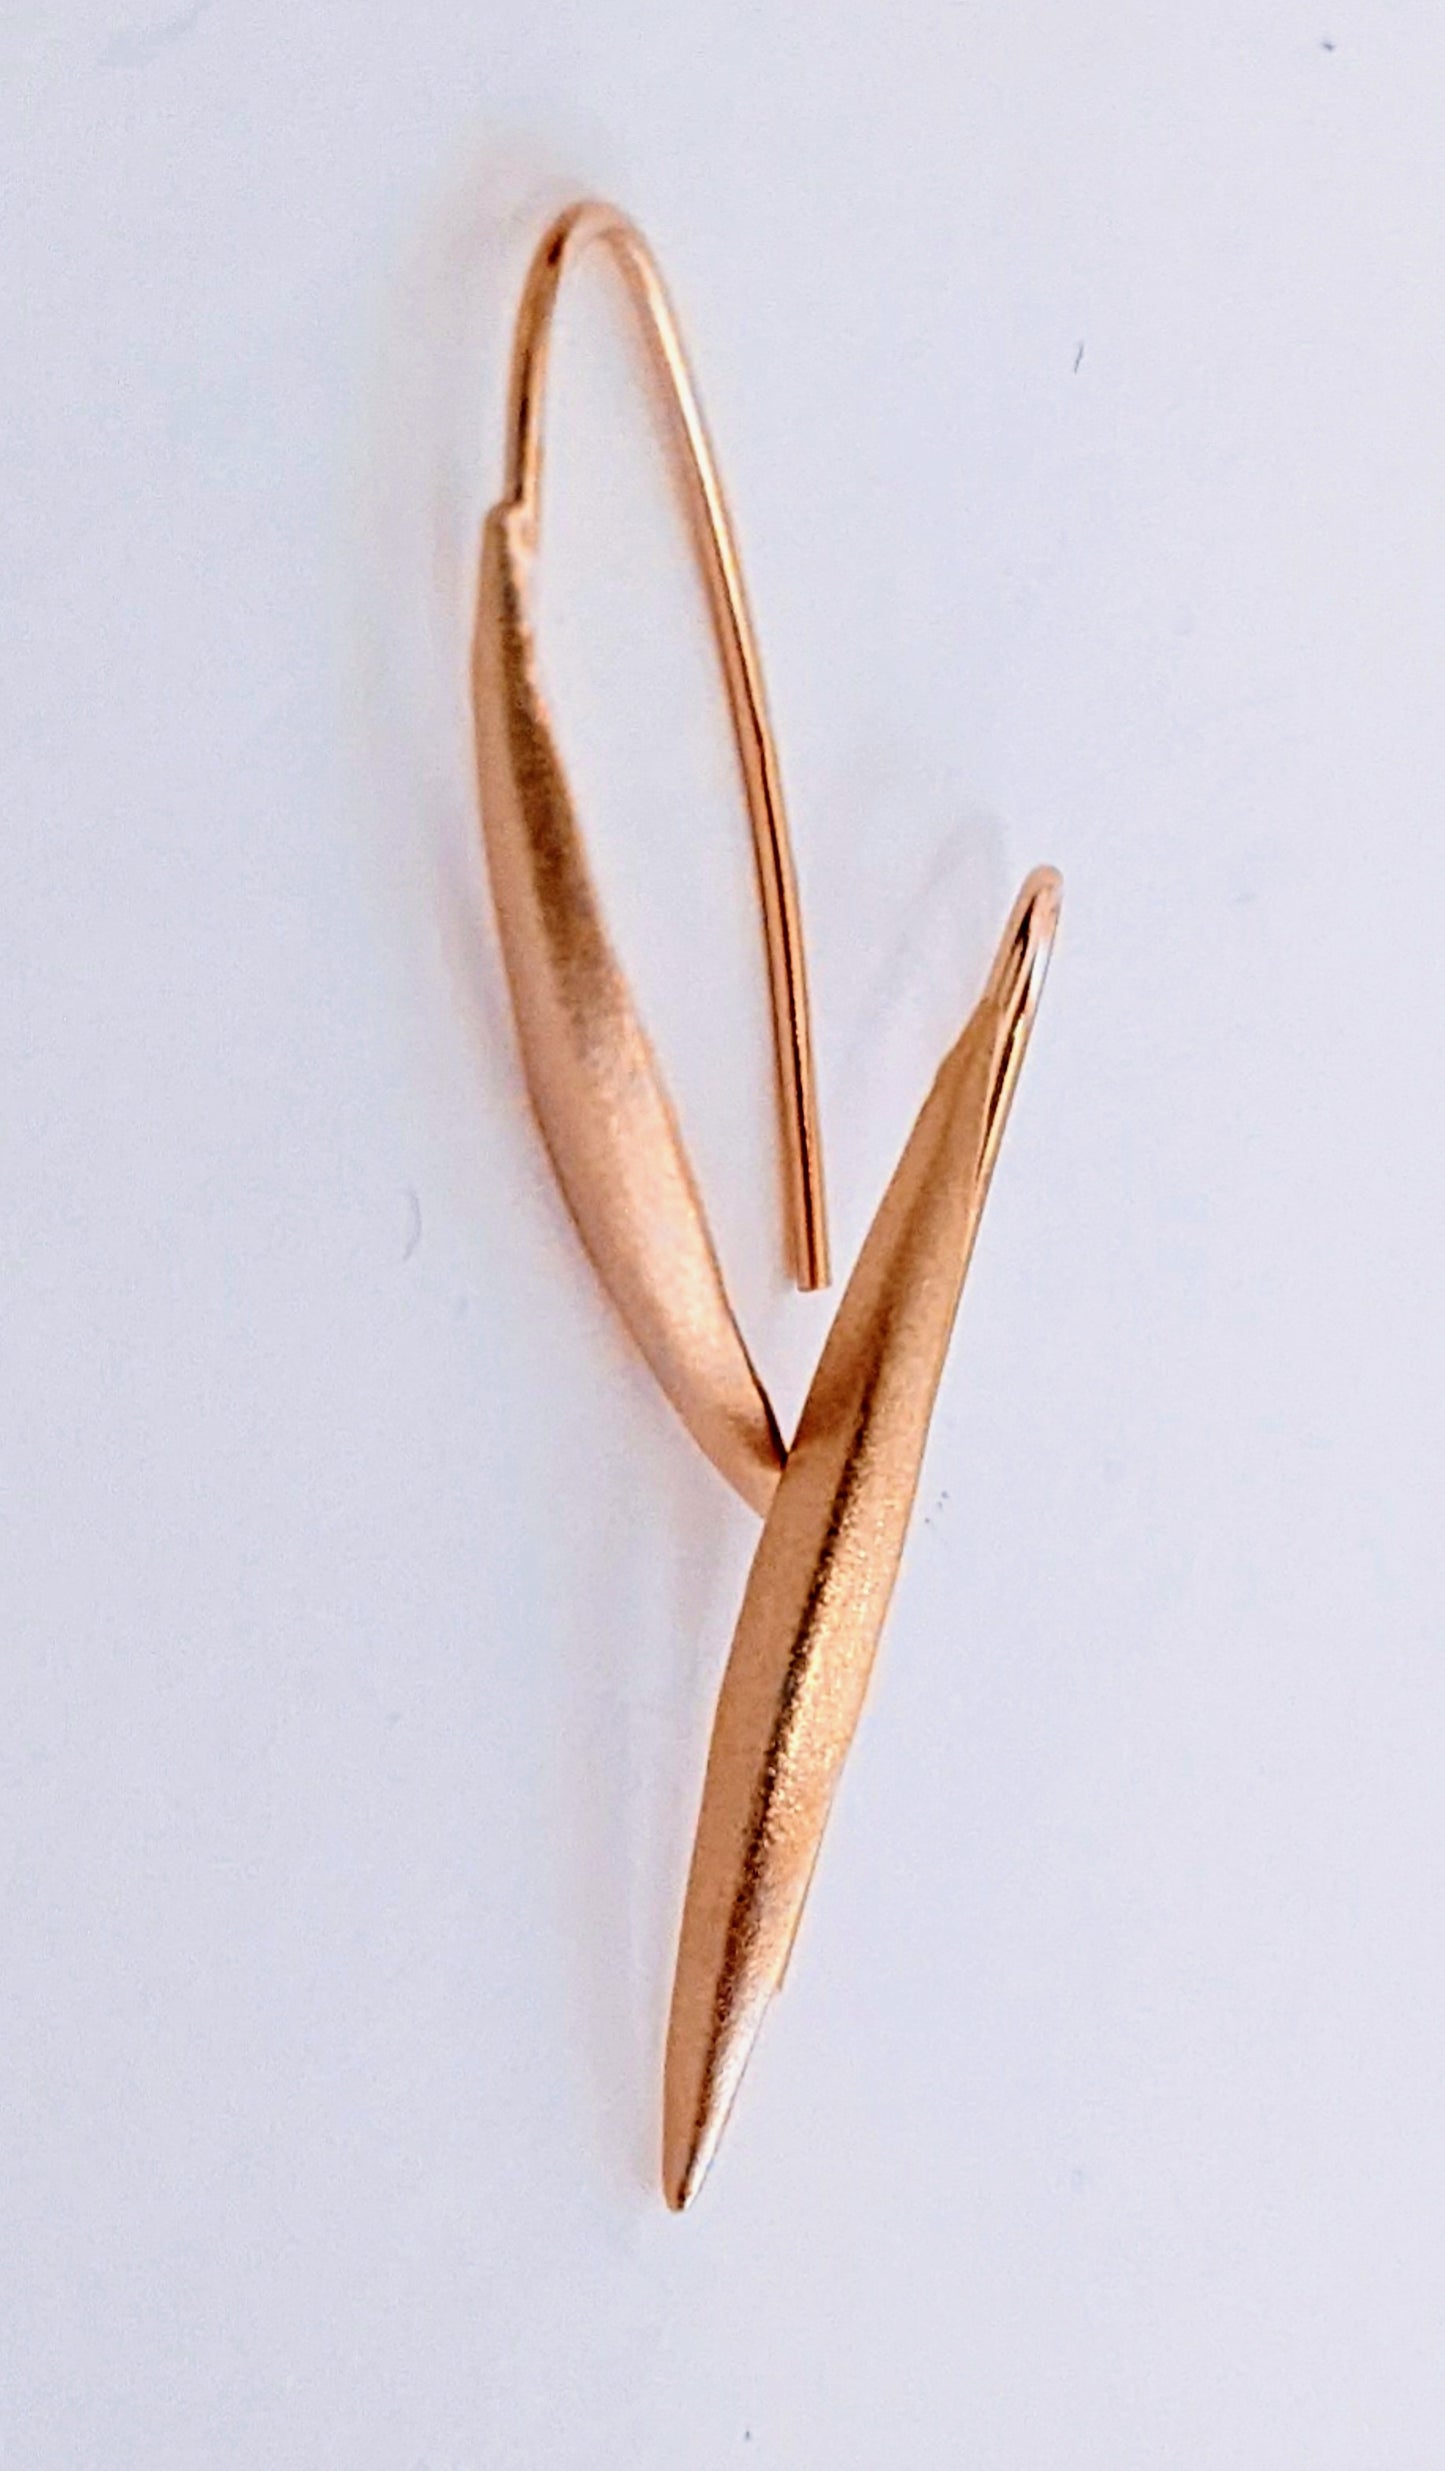 Kindred Drop Rose Gold Earrings